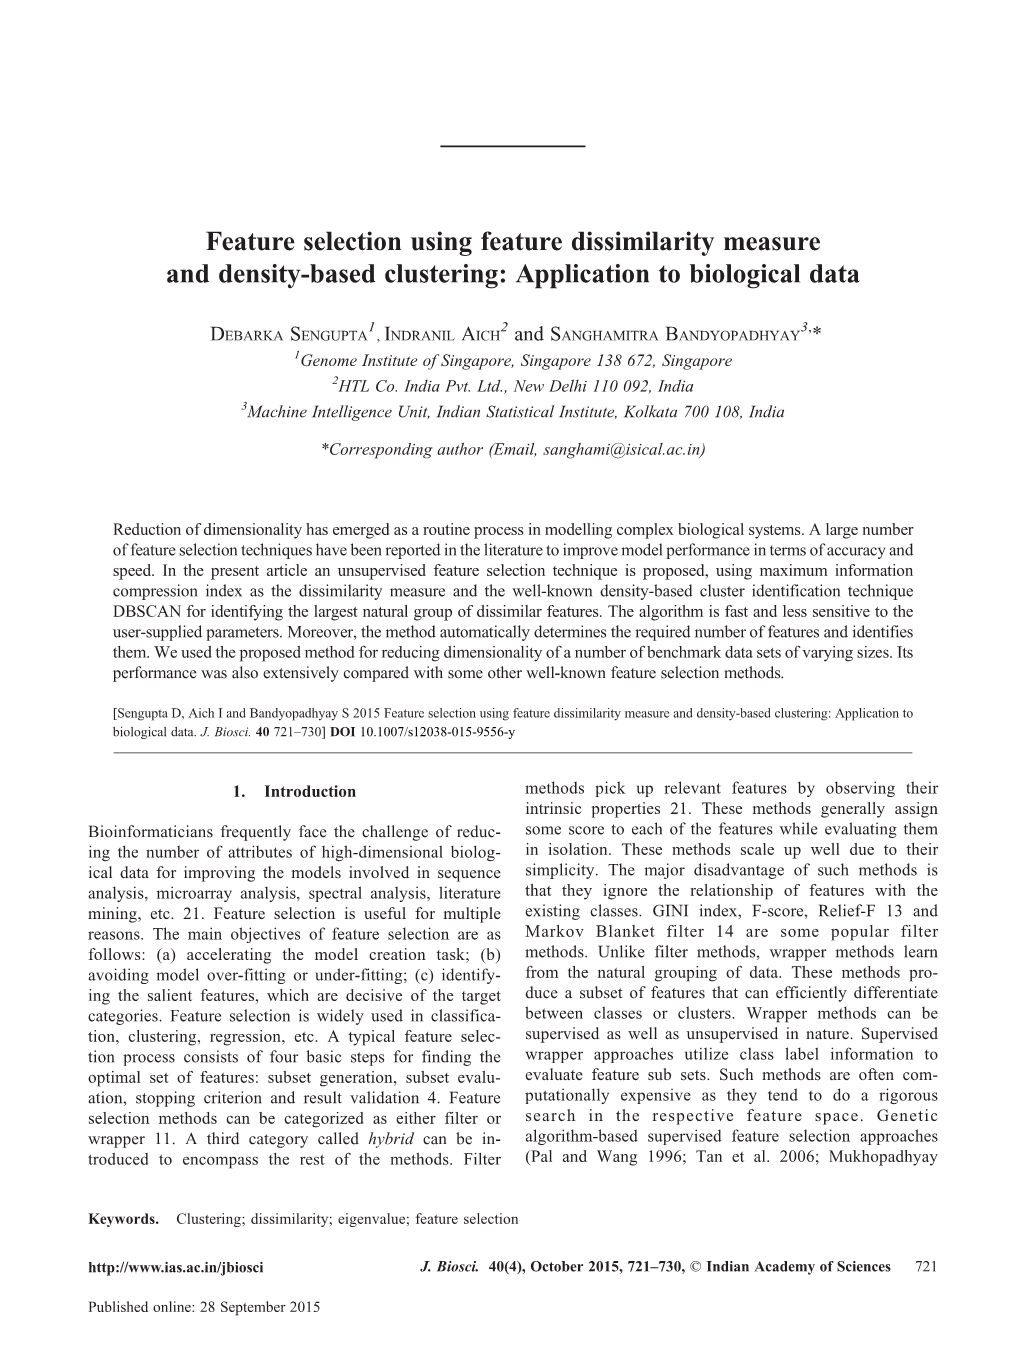 Feature Selection Using Feature Dissimilarity Measure and Density-Based Clustering: Application to Biological Data